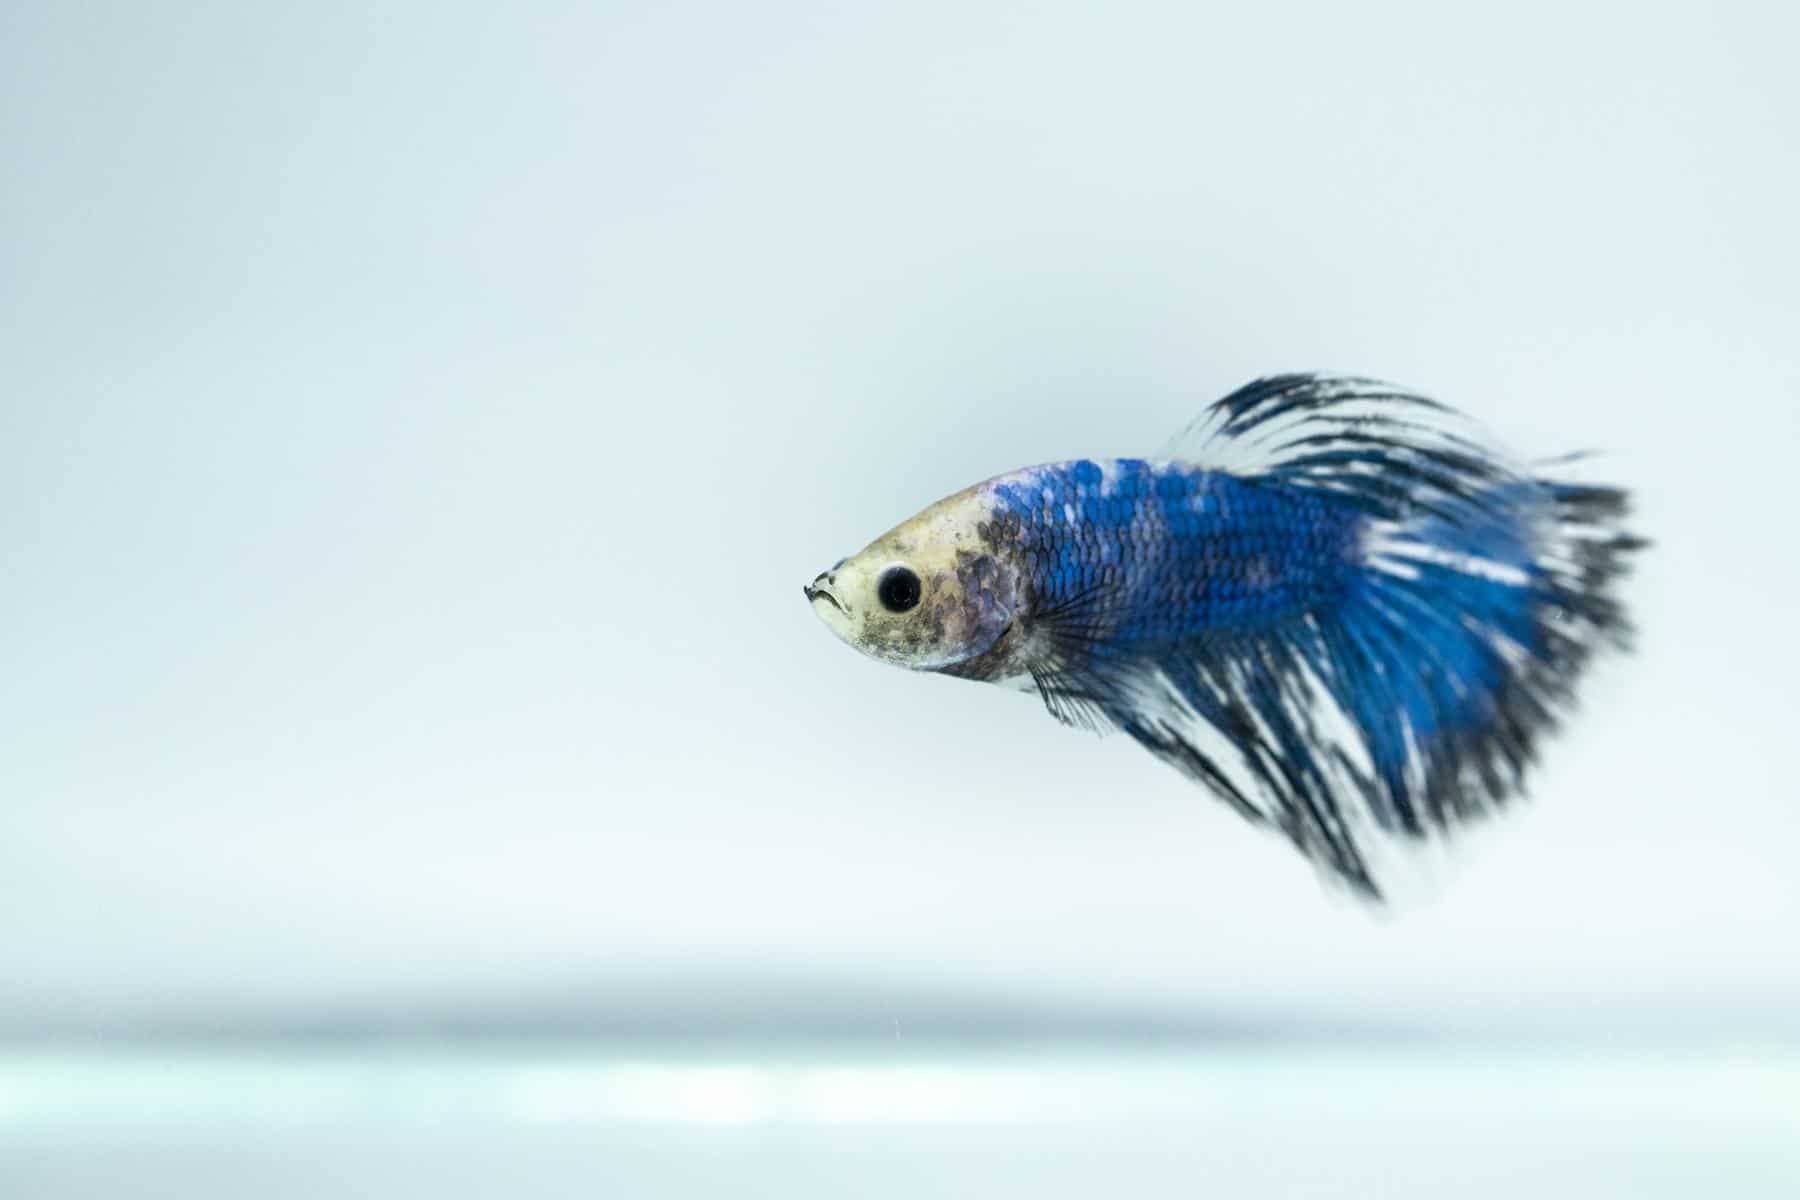 sick betta fish with fin rot